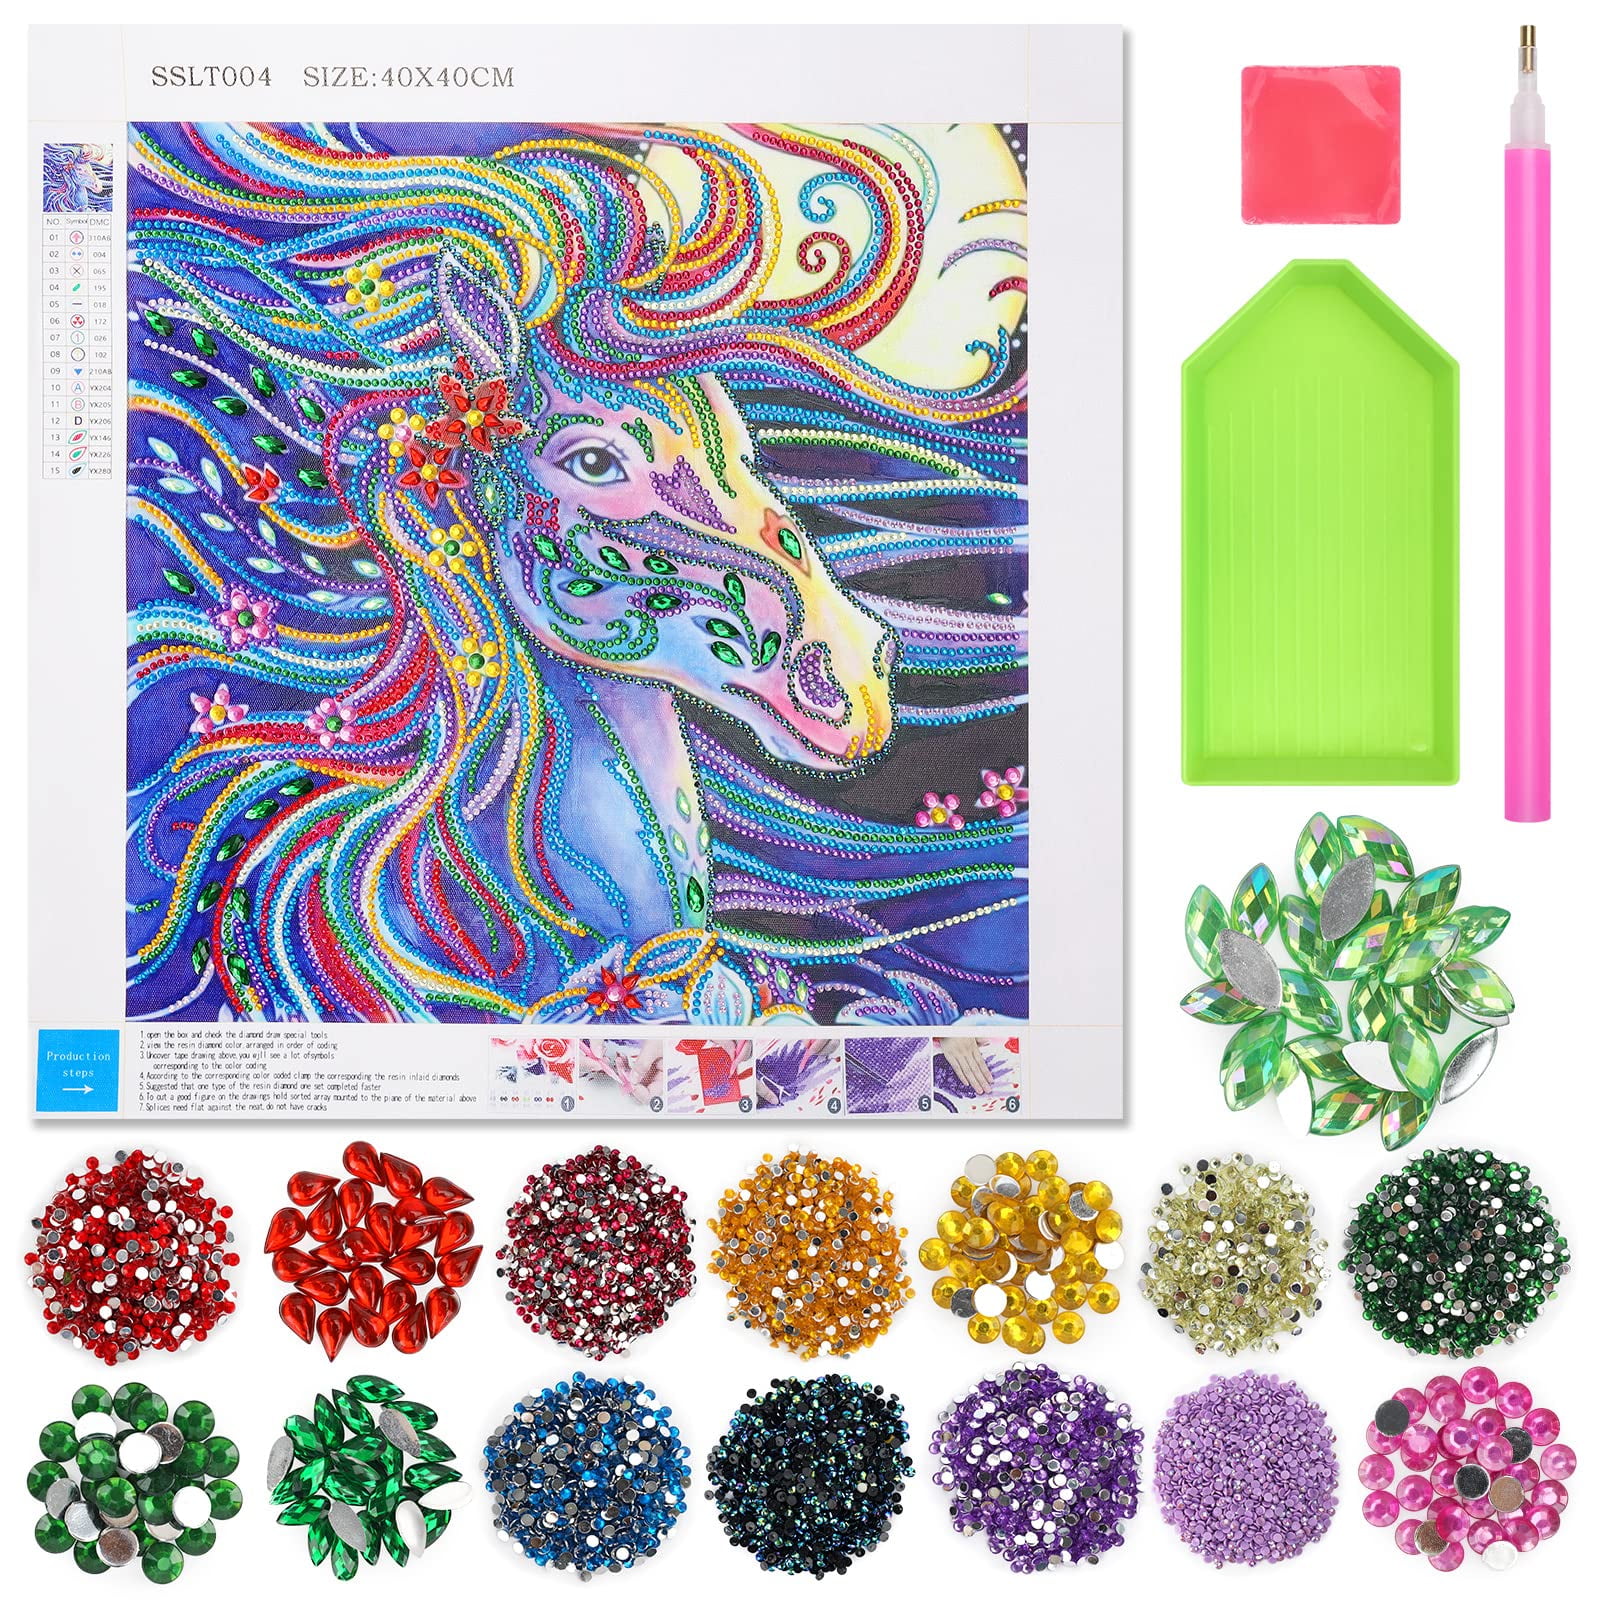 Girl Toys Age 9 10 11 12, 5D Diamond Art Kits Presents for 8 9 10 11 12 Year Old Girls Kids 40 * 40 cm Painting Kits Gifts for 9-15 Year Olds Girls